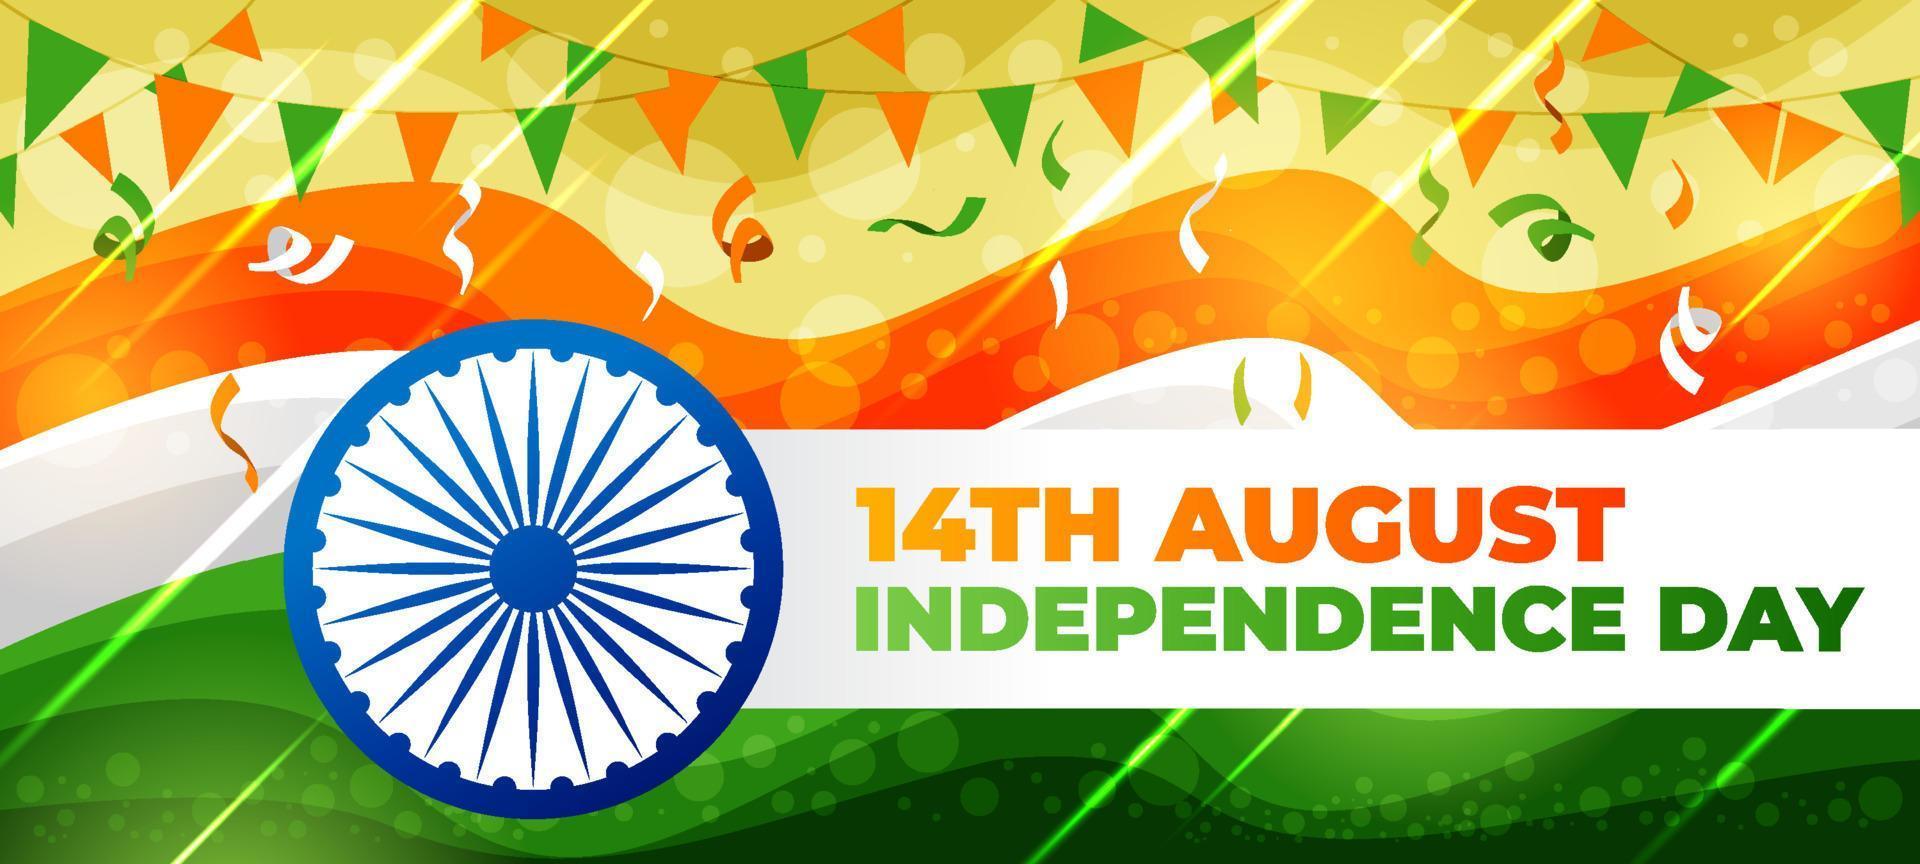 India Independence Day Concept vector